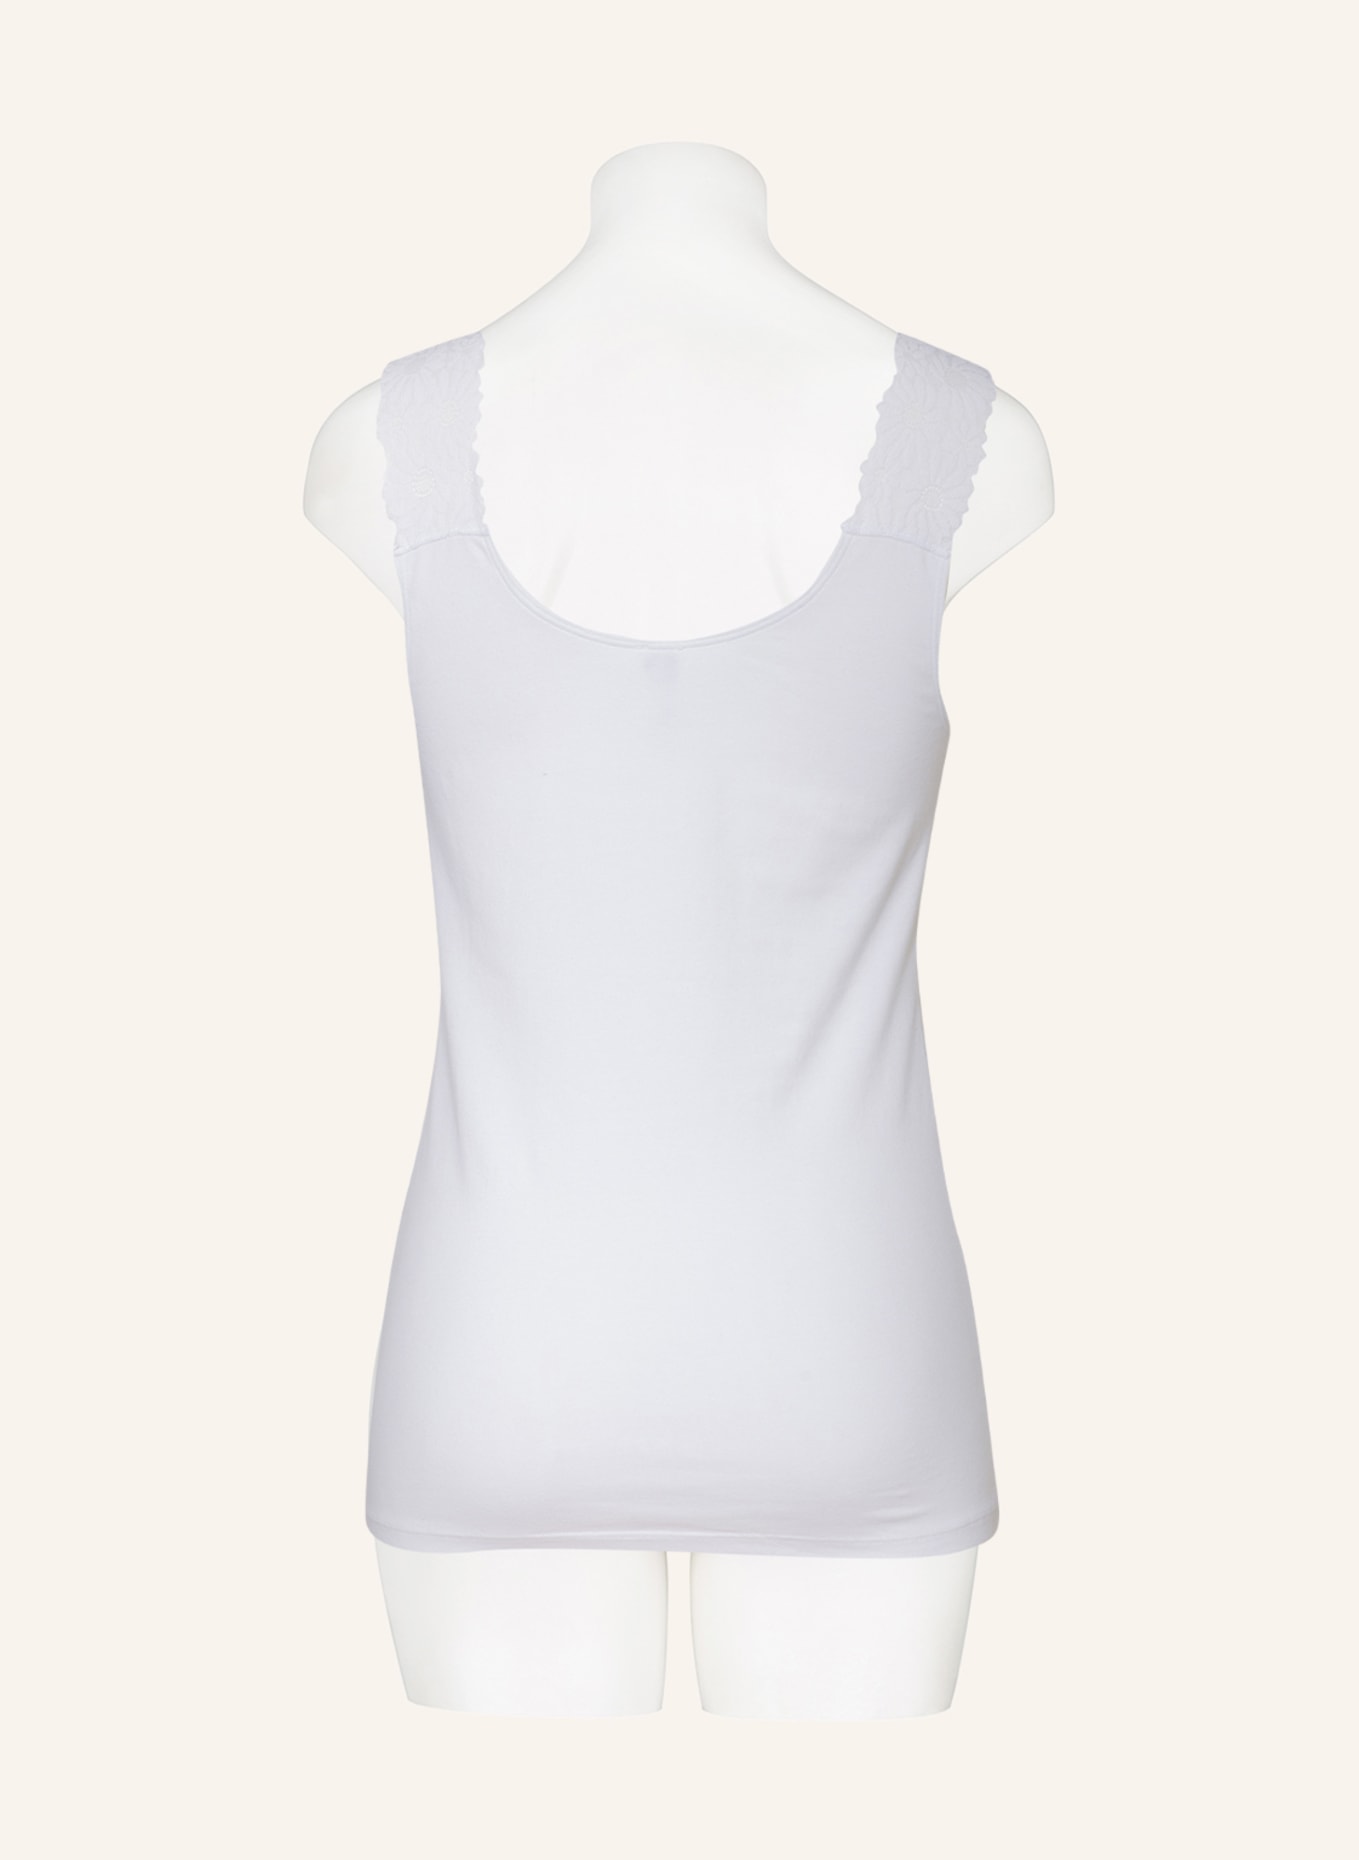 Skiny Top EVERY DAY IN COTTON, Farbe: WEISS (Bild 3)